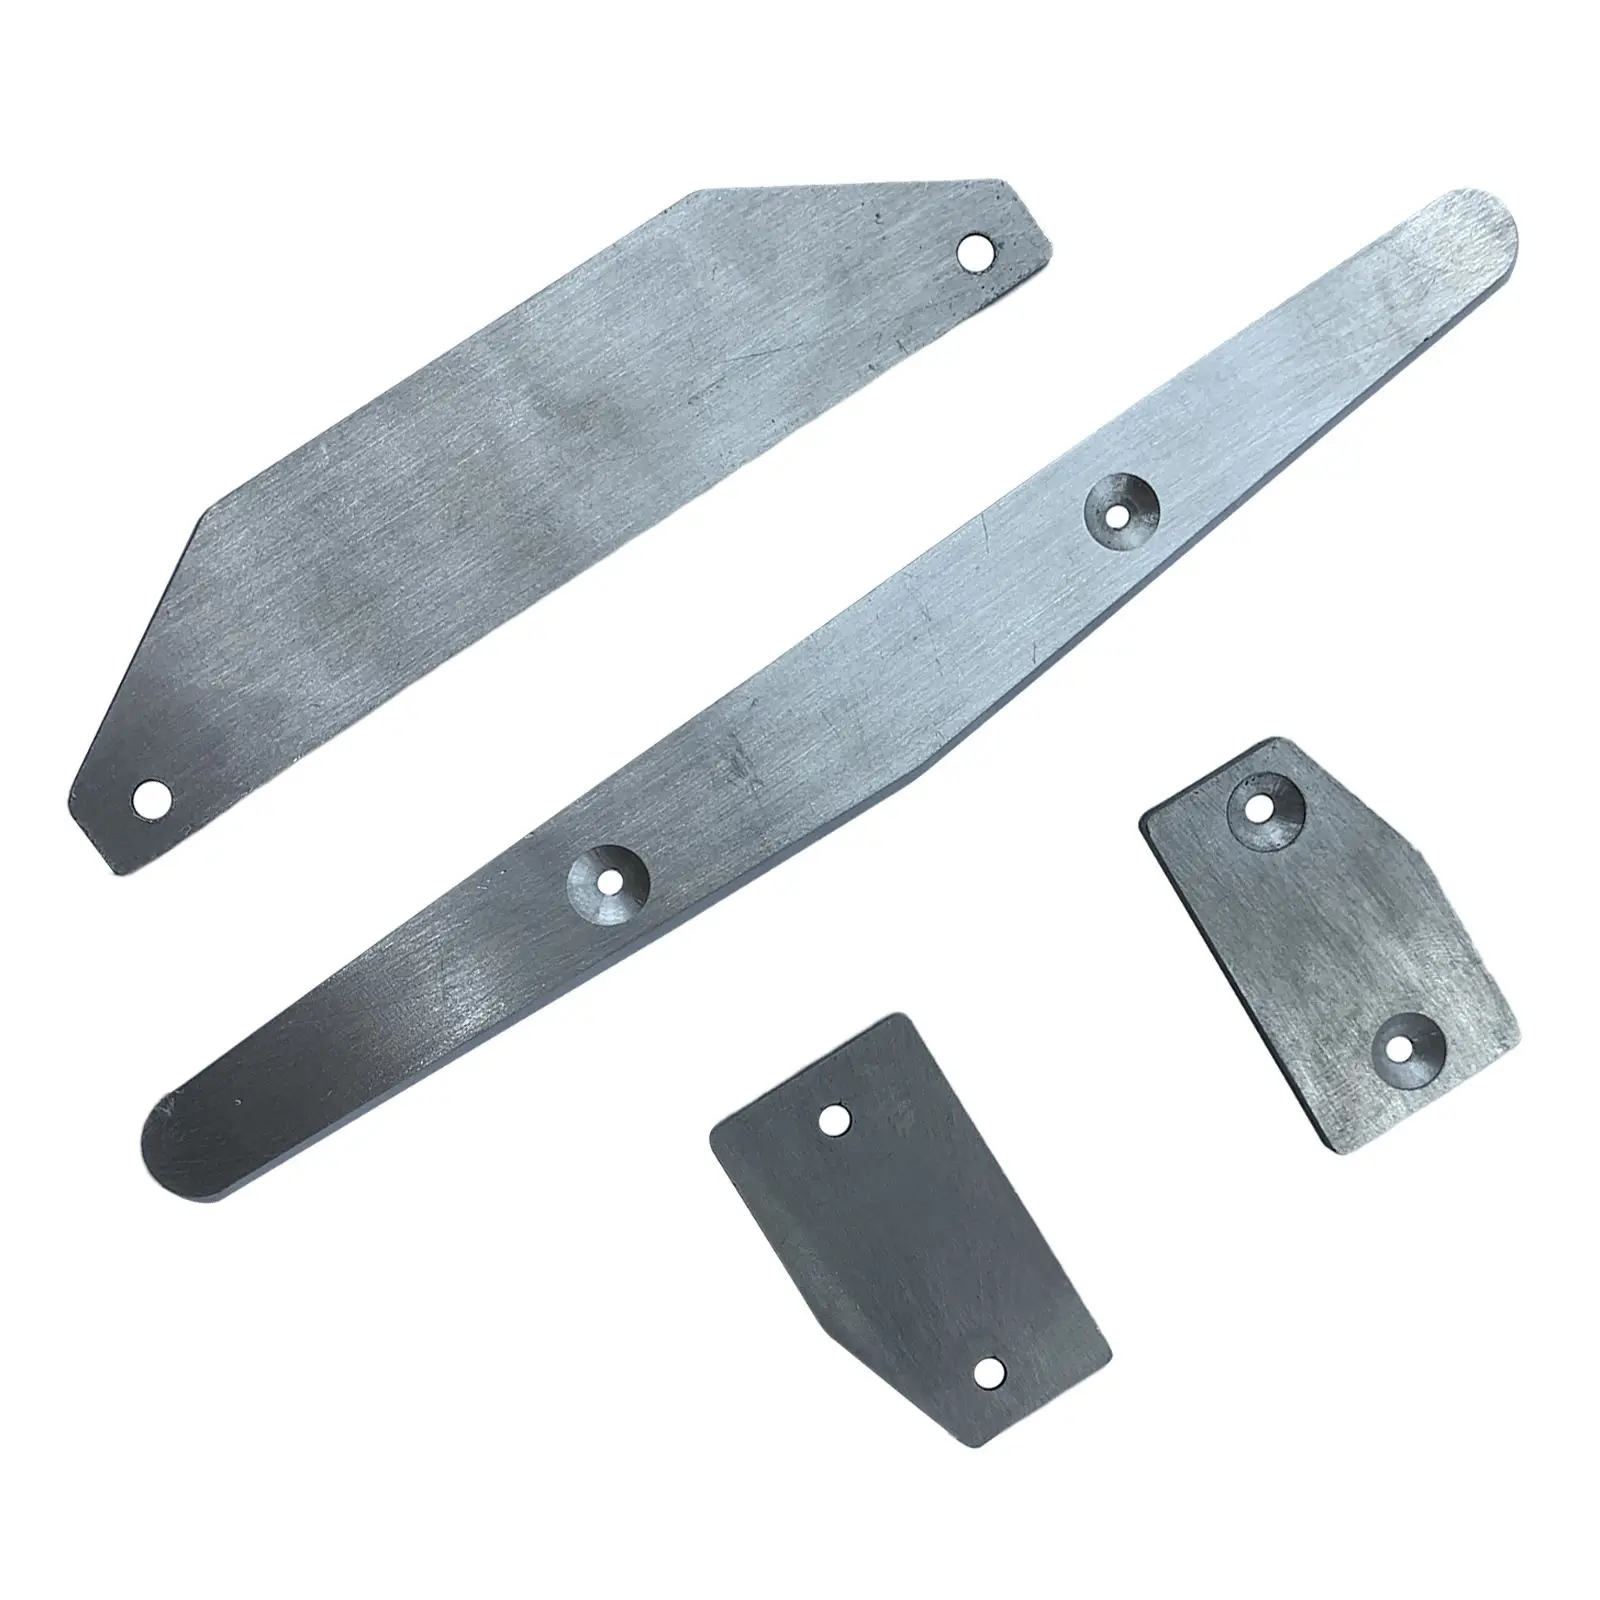 Vehicle 4-Pack Silver Chais Protectors Protection Plates ,Moulding Replacement Acceories for Arrma Limitle Skid Plates